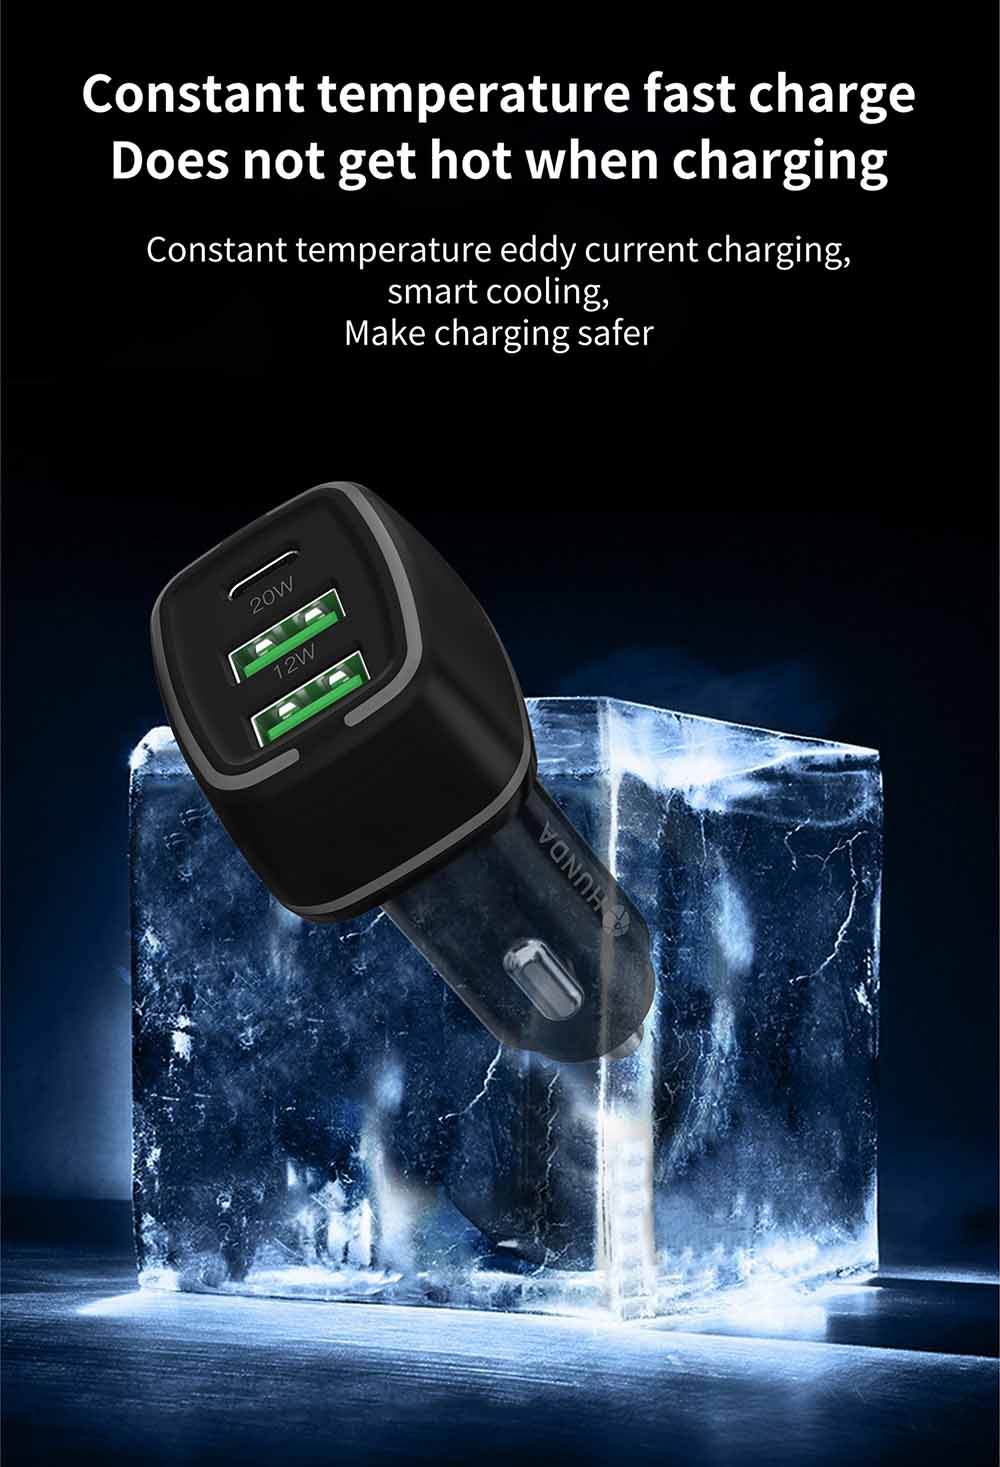 H2204 1C2A dc car charger with high-end material